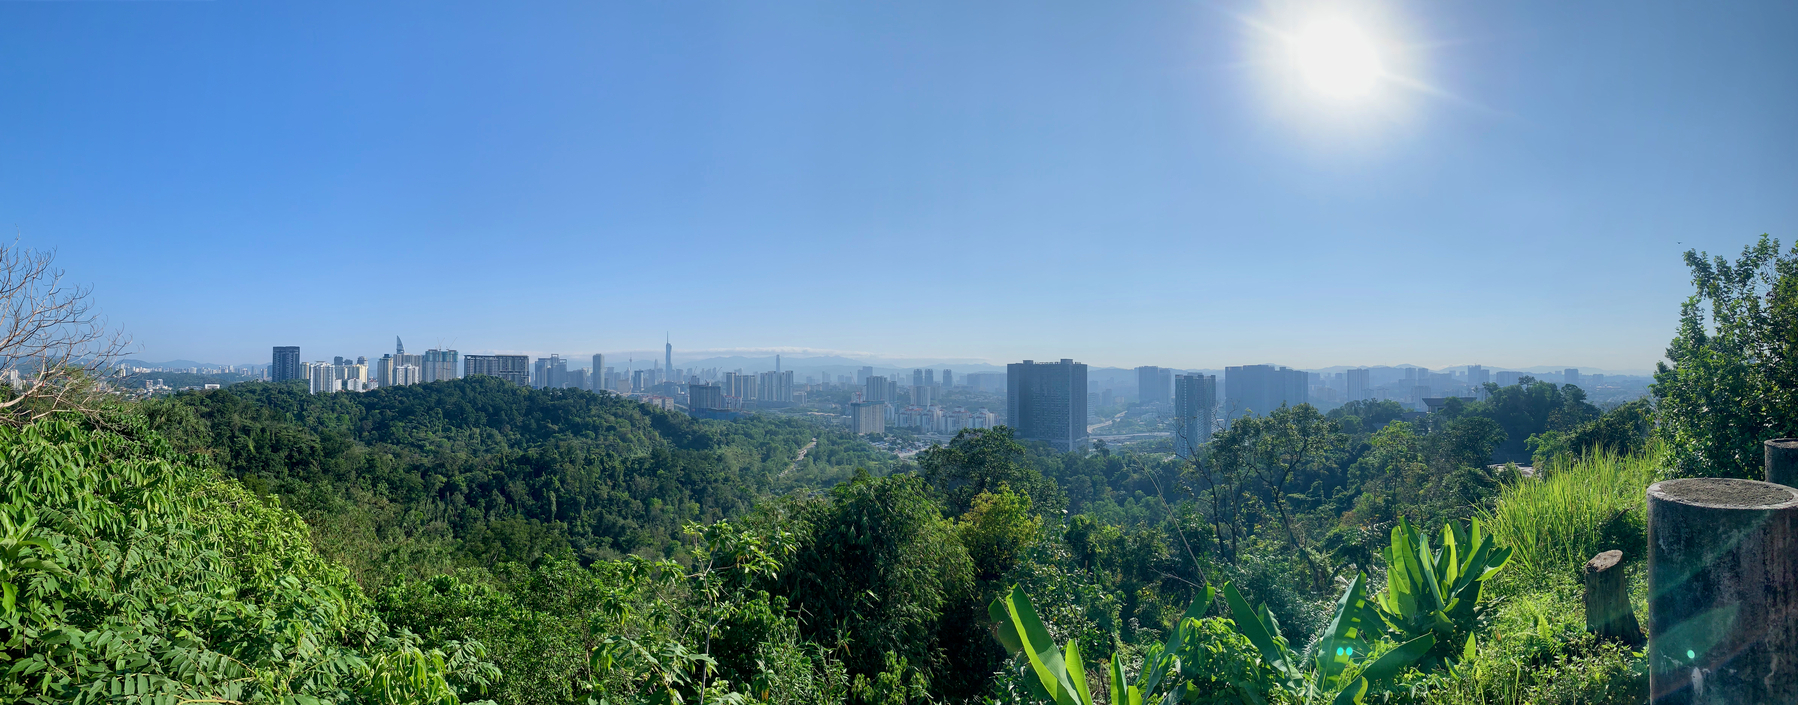 Panoramic view of the Kuala Lumpur skyline, viewed from the top of the hike at Bukit Gasing